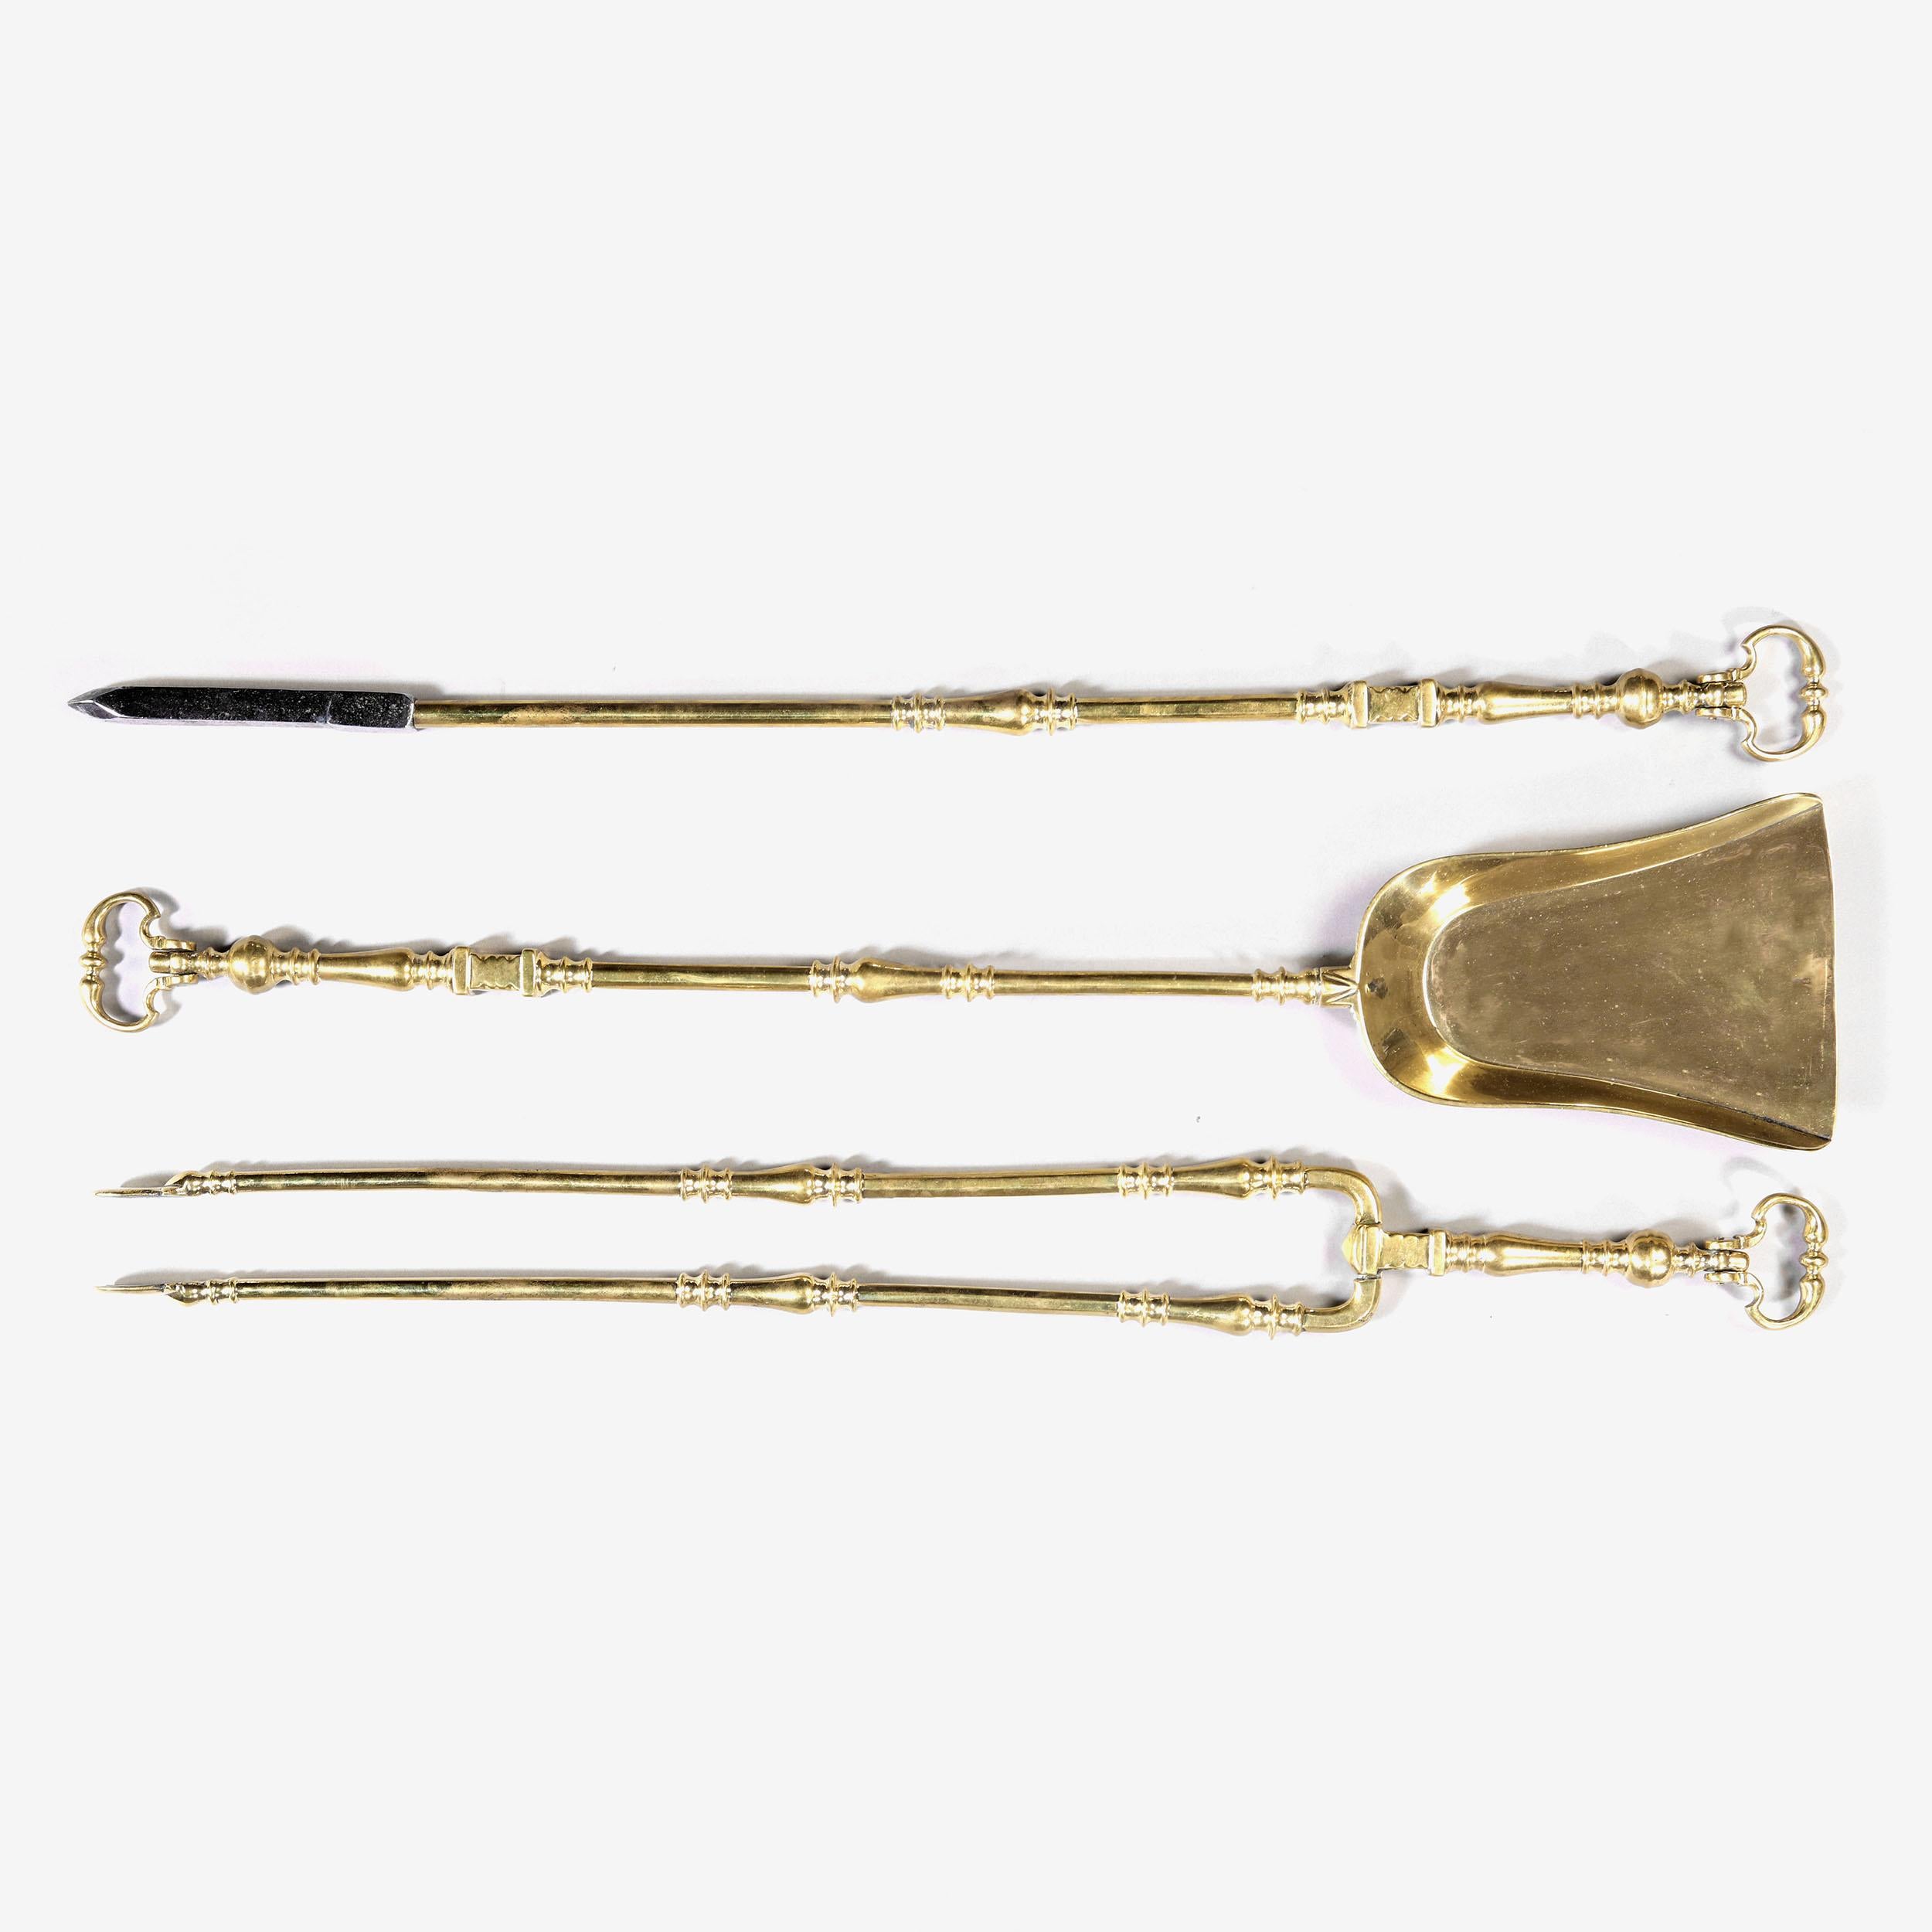 A good scale set of three brass and steel fire tools with moulded shafts.